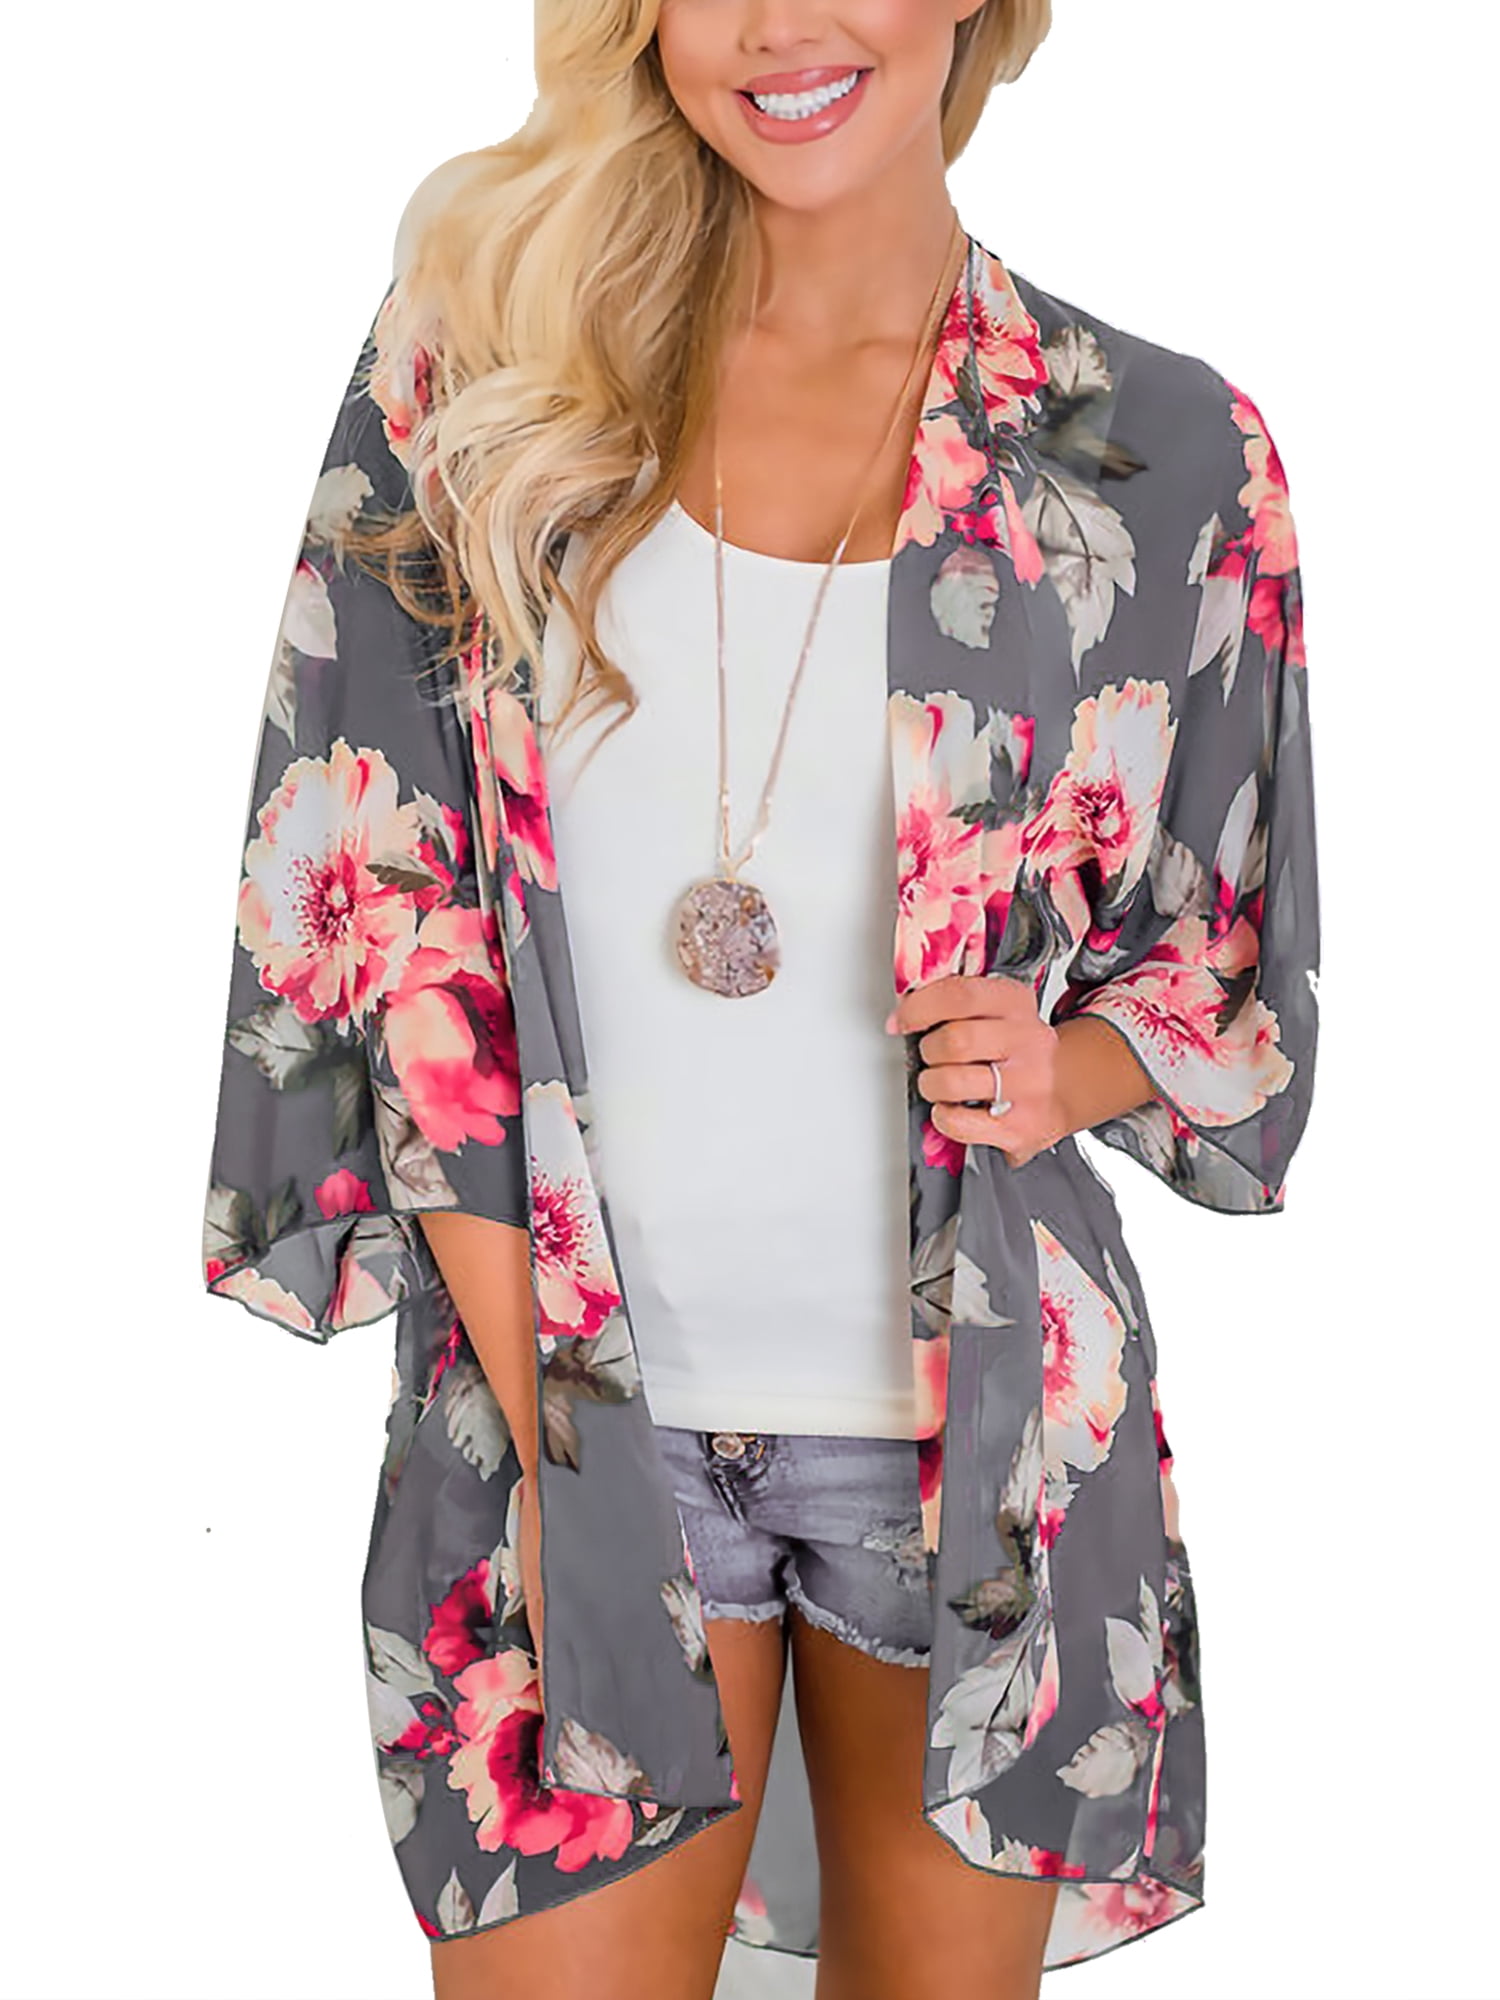 Womens Kimono Beach Cover Up Chiffon Cardigan Floral Tops Loose Capes 